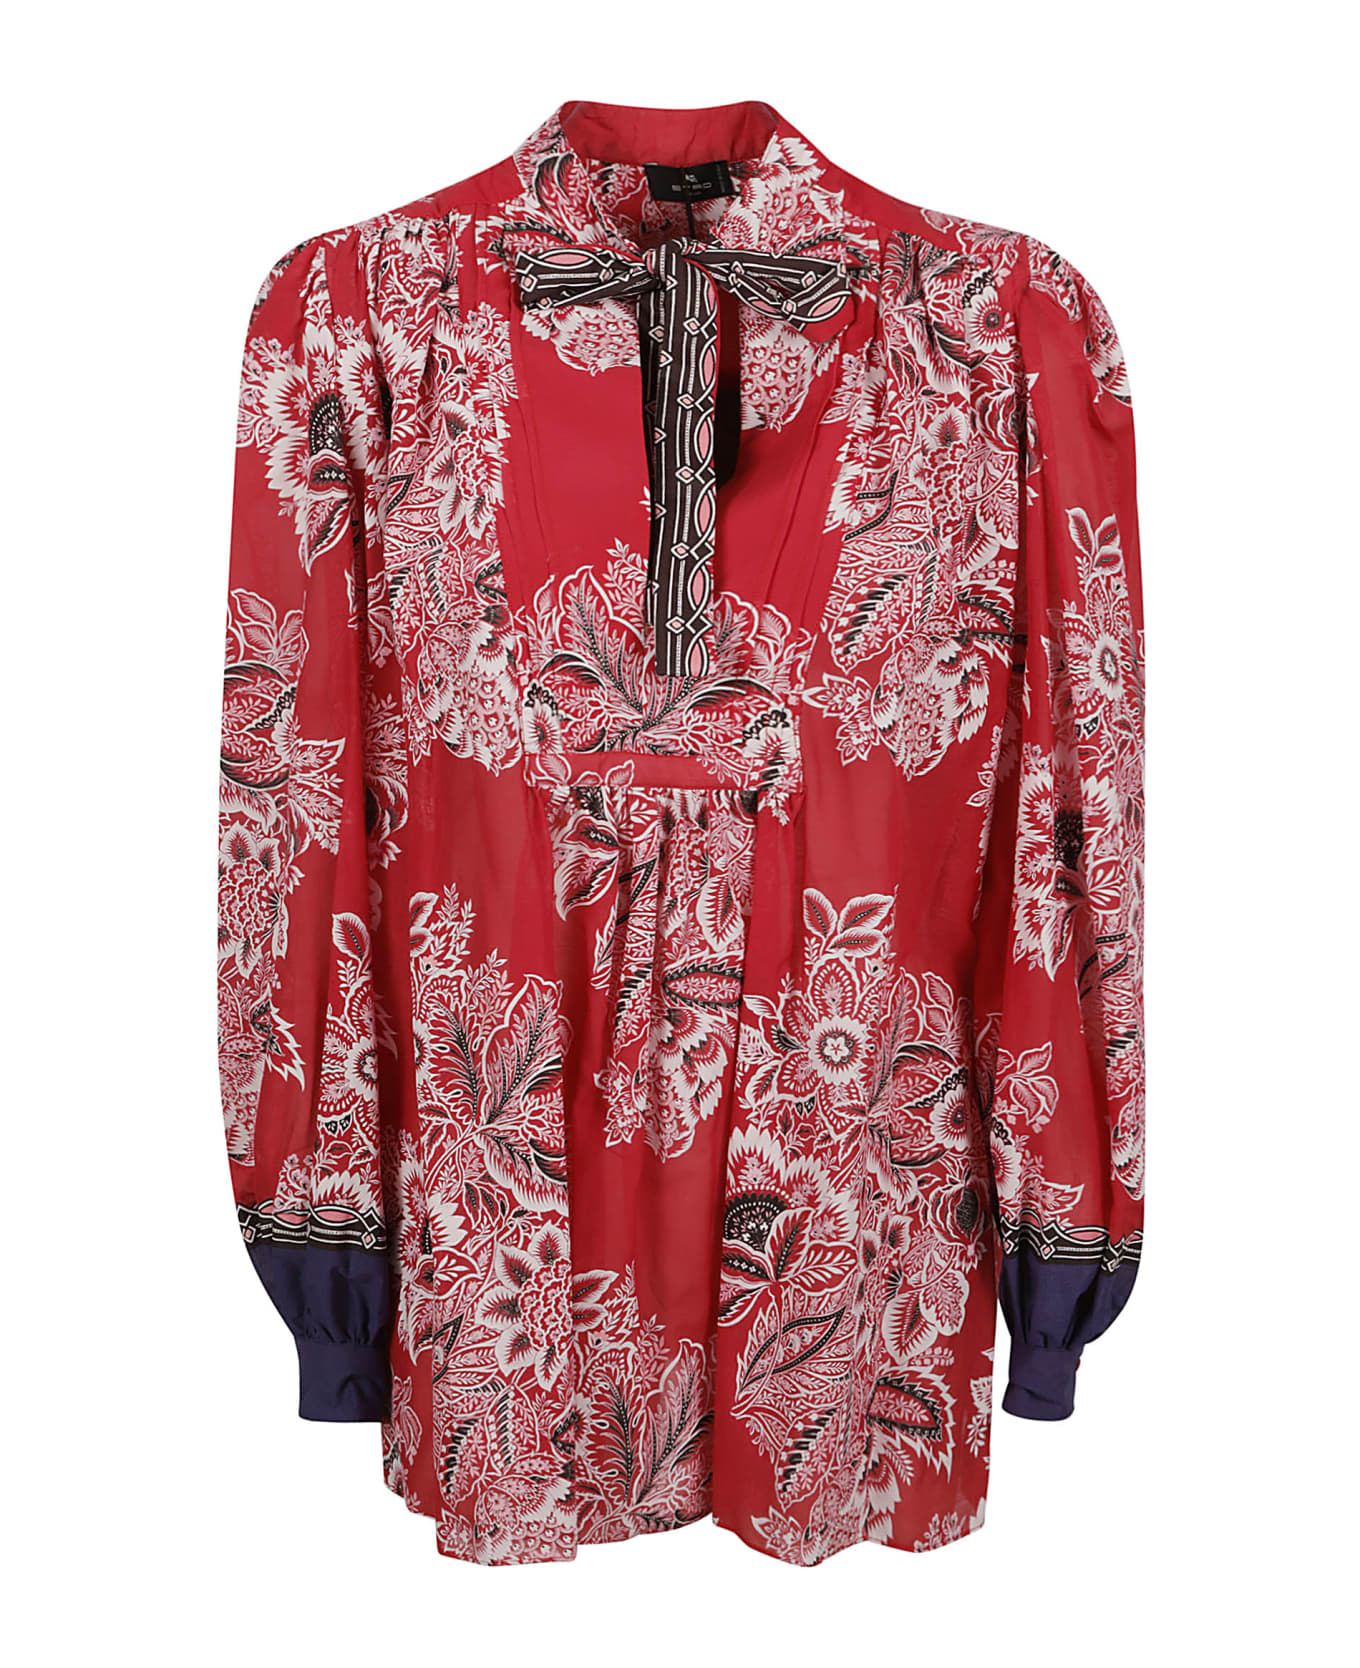 Etro Floral Print Tie-neck Blouse - Red ブラウス